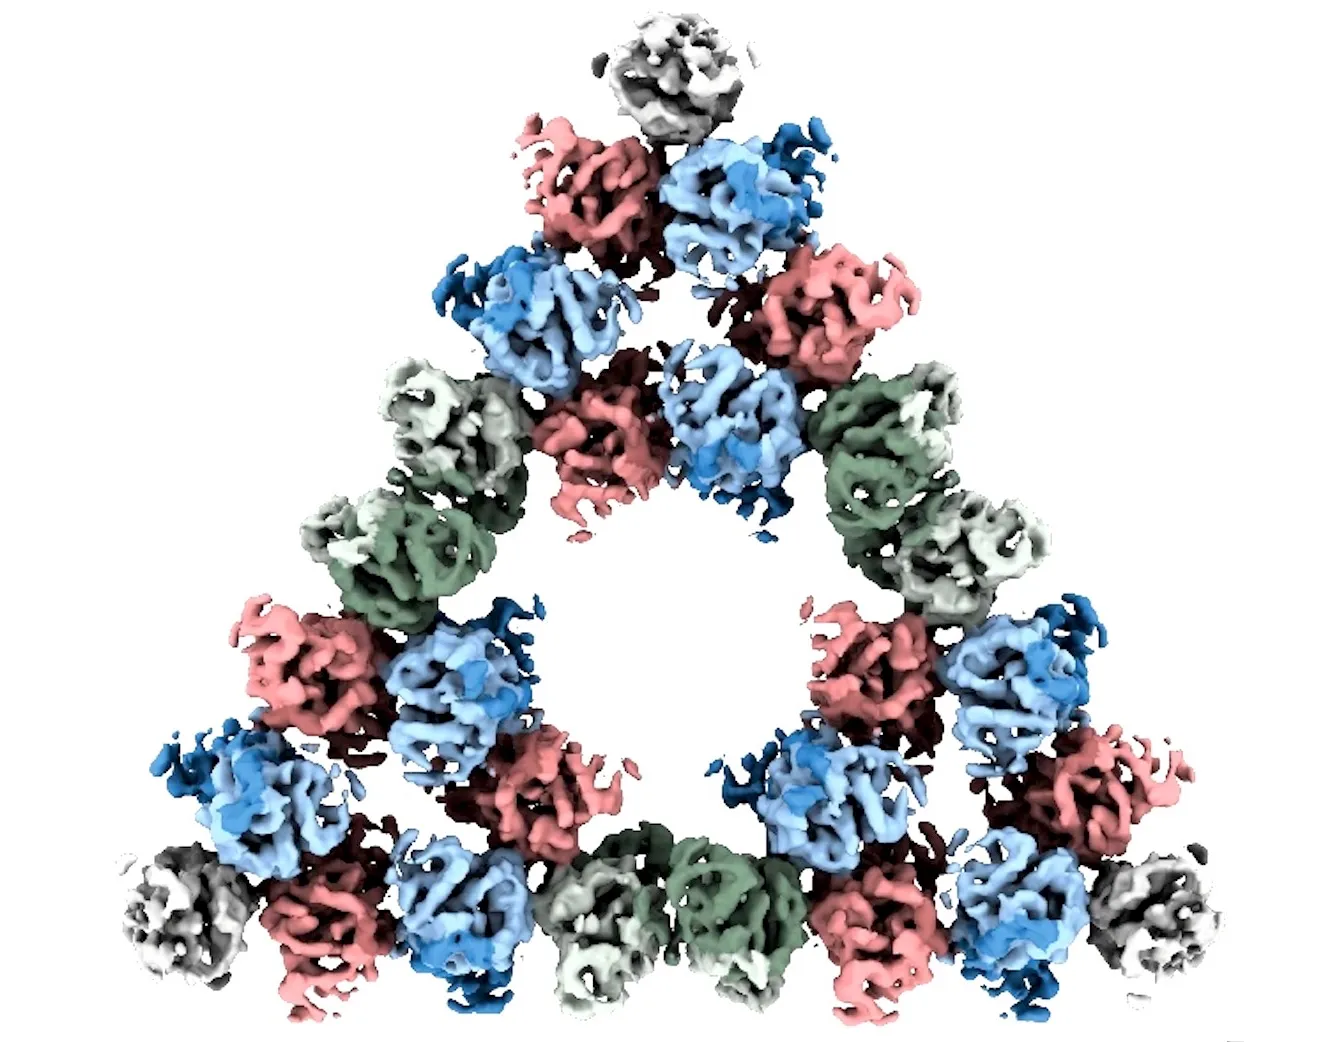 Researchers Discover a Fractal Protein